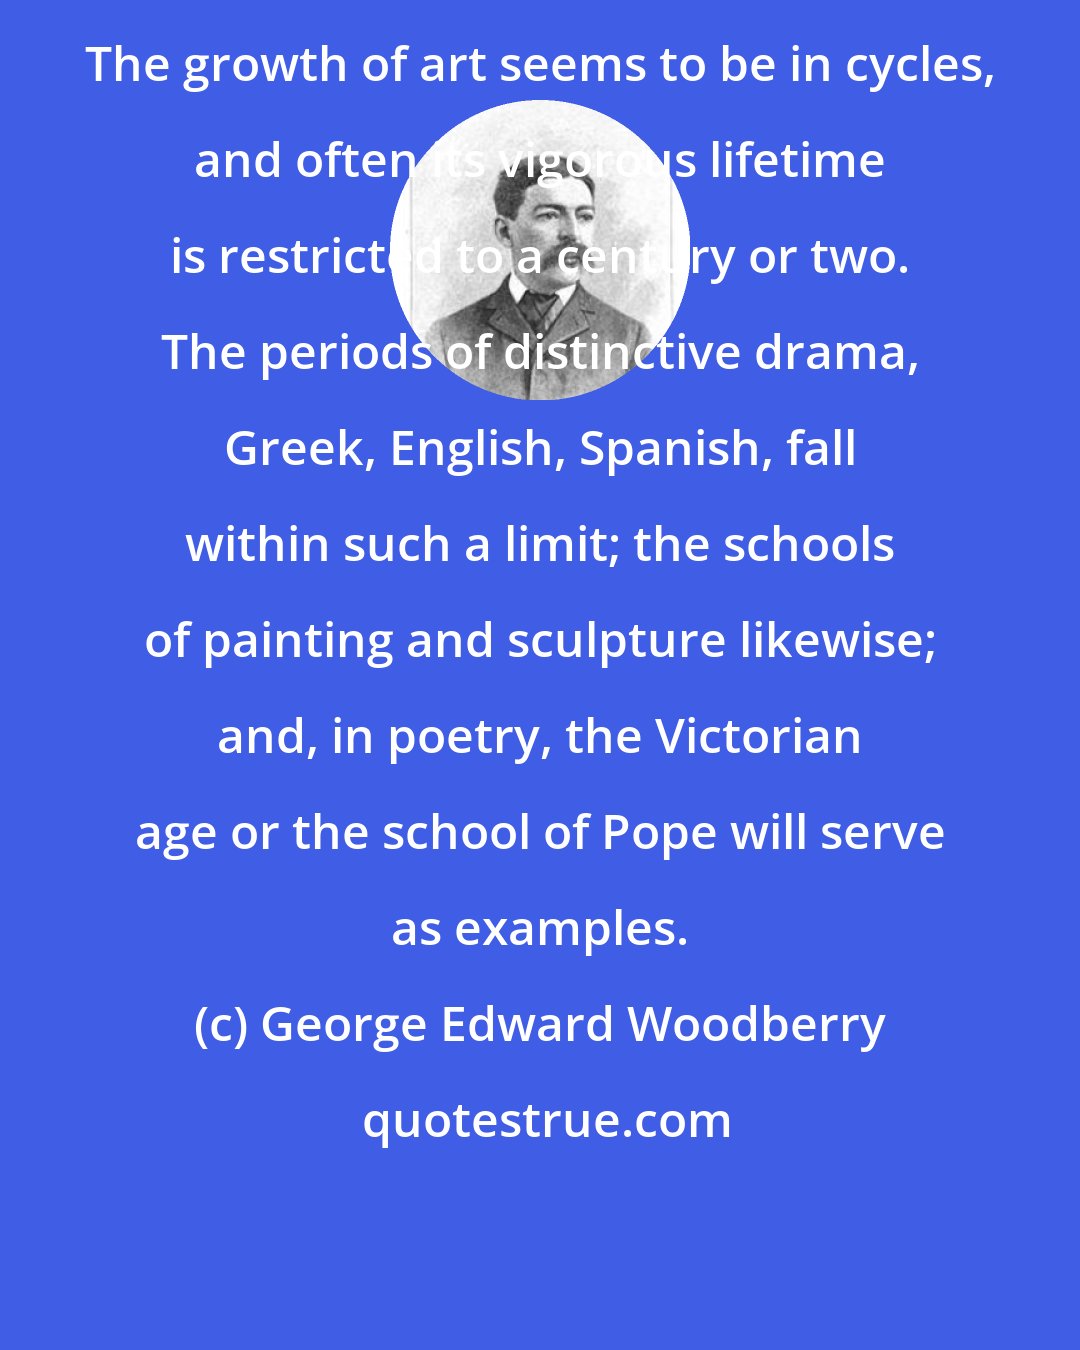 George Edward Woodberry: The growth of art seems to be in cycles, and often its vigorous lifetime is restricted to a century or two. The periods of distinctive drama, Greek, English, Spanish, fall within such a limit; the schools of painting and sculpture likewise; and, in poetry, the Victorian age or the school of Pope will serve as examples.